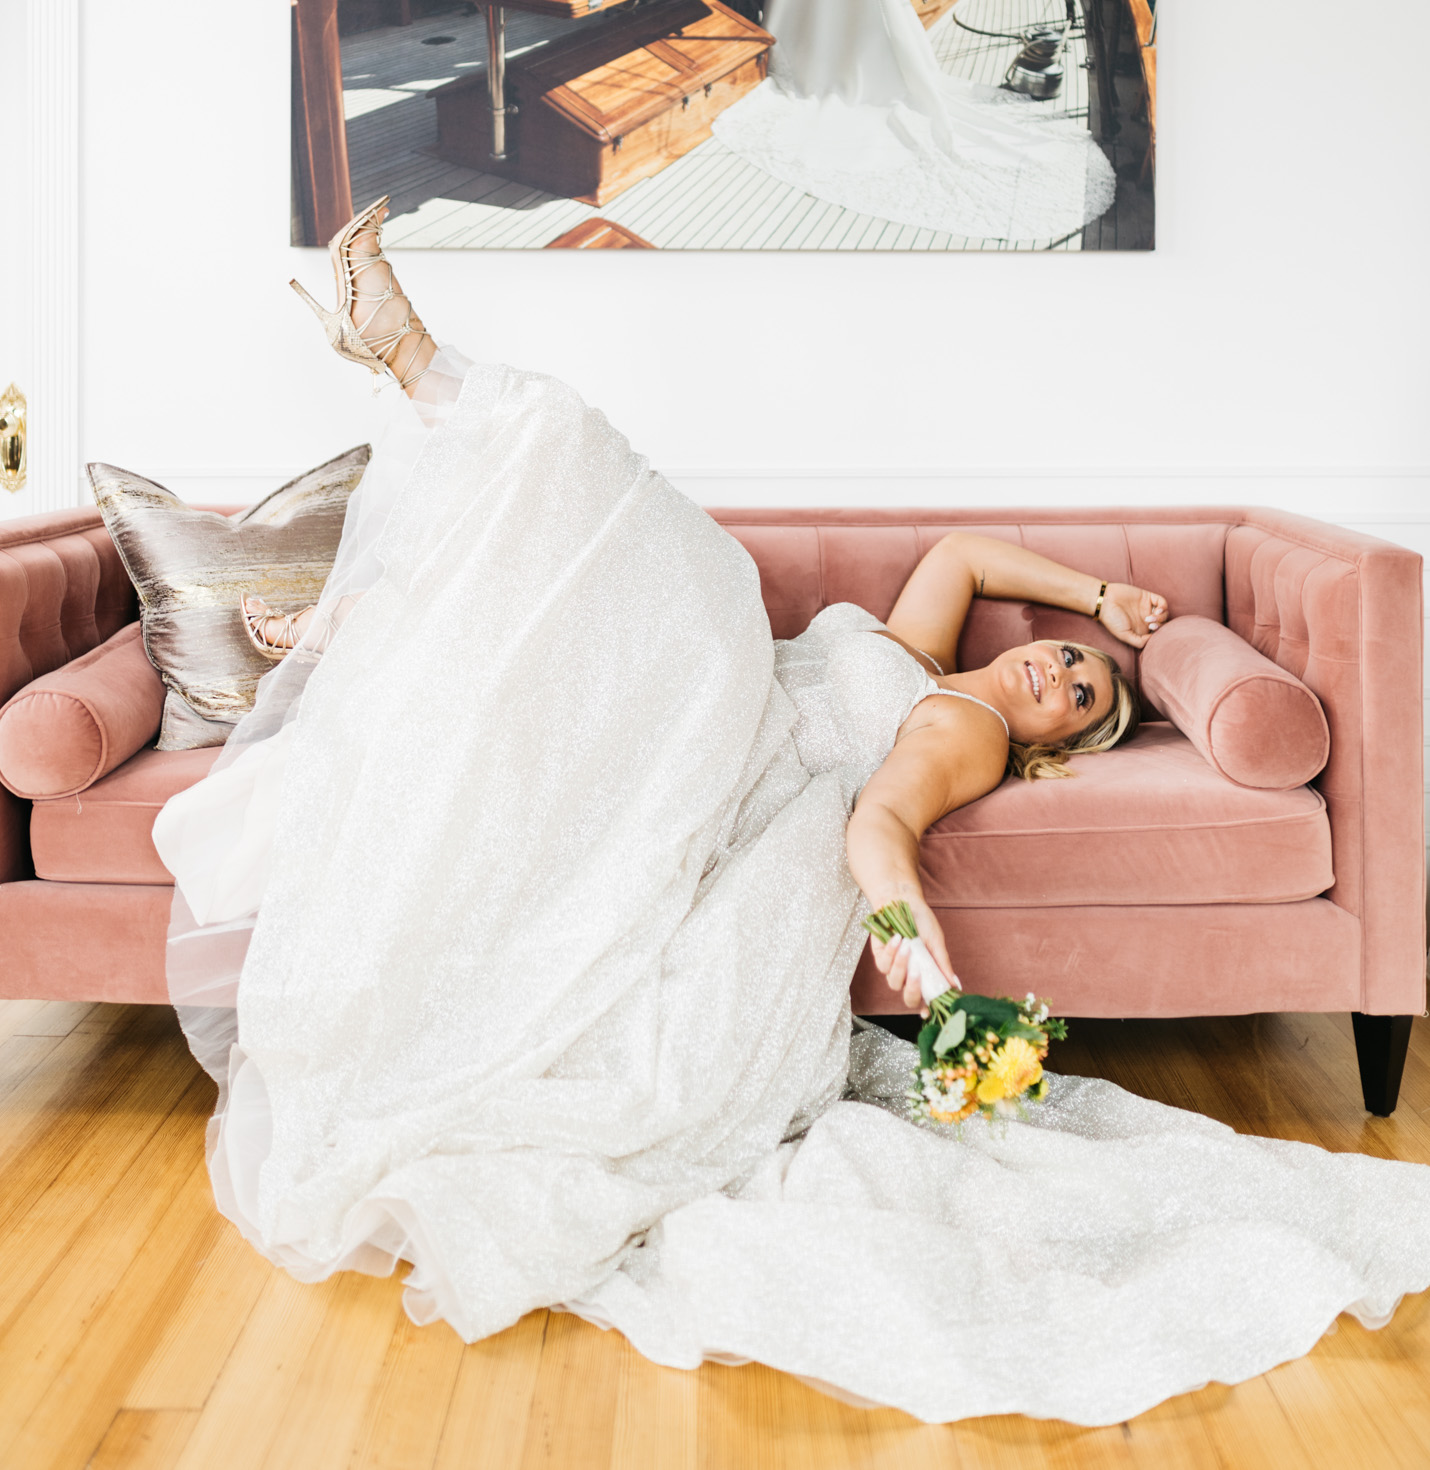 A bride posing on a couch.